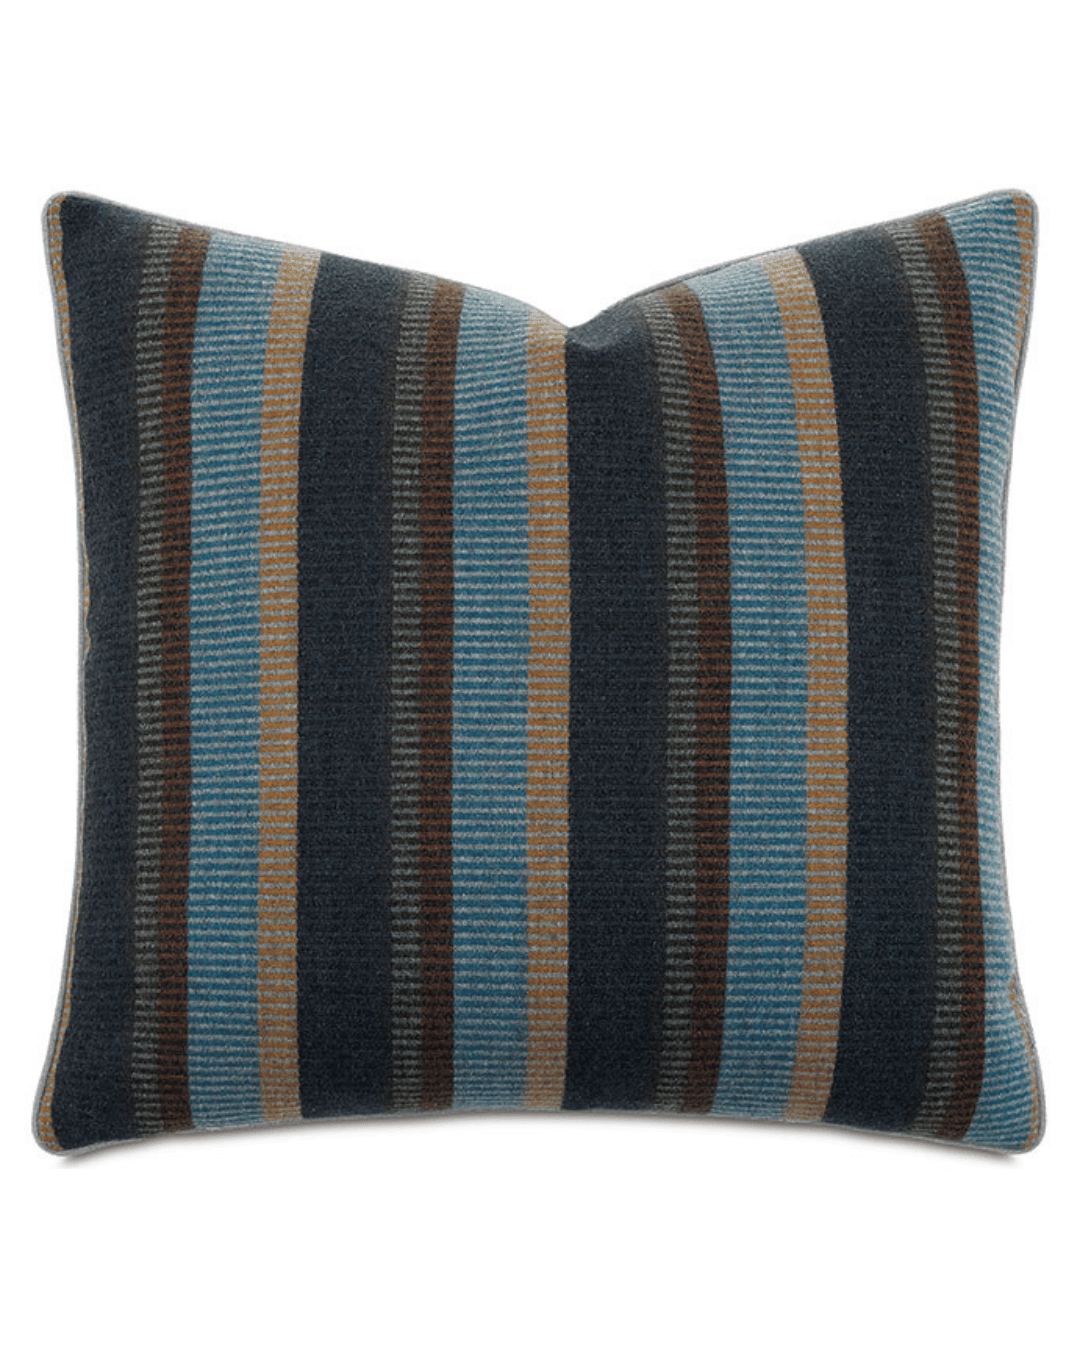 A STRIPED EURO SHAM 27x27 with alternating vertical stripes of blue, brown, tan, and gray. The fabric appears to be textured, giving the sham a cozy look. The edges are neatly finished, and the overall design is symmetrical and balanced—a perfect complement to any Modesta Fog-themed decor from Eastern Accents.